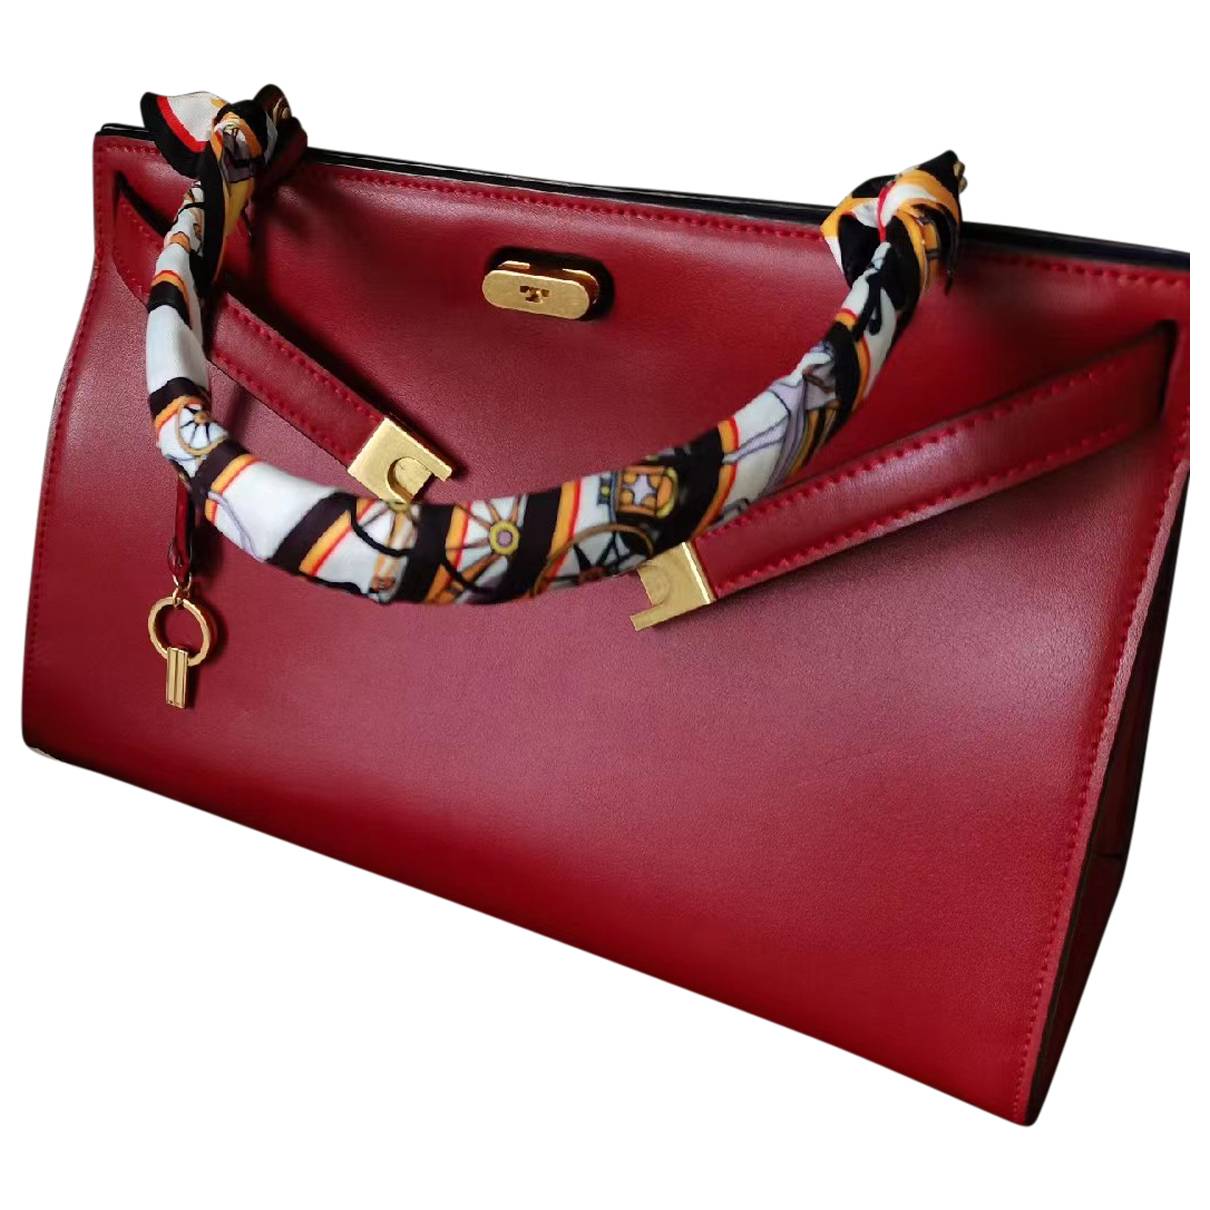 Lee radziwill petite leather satchel Tory Burch Red in Leather - 32469256